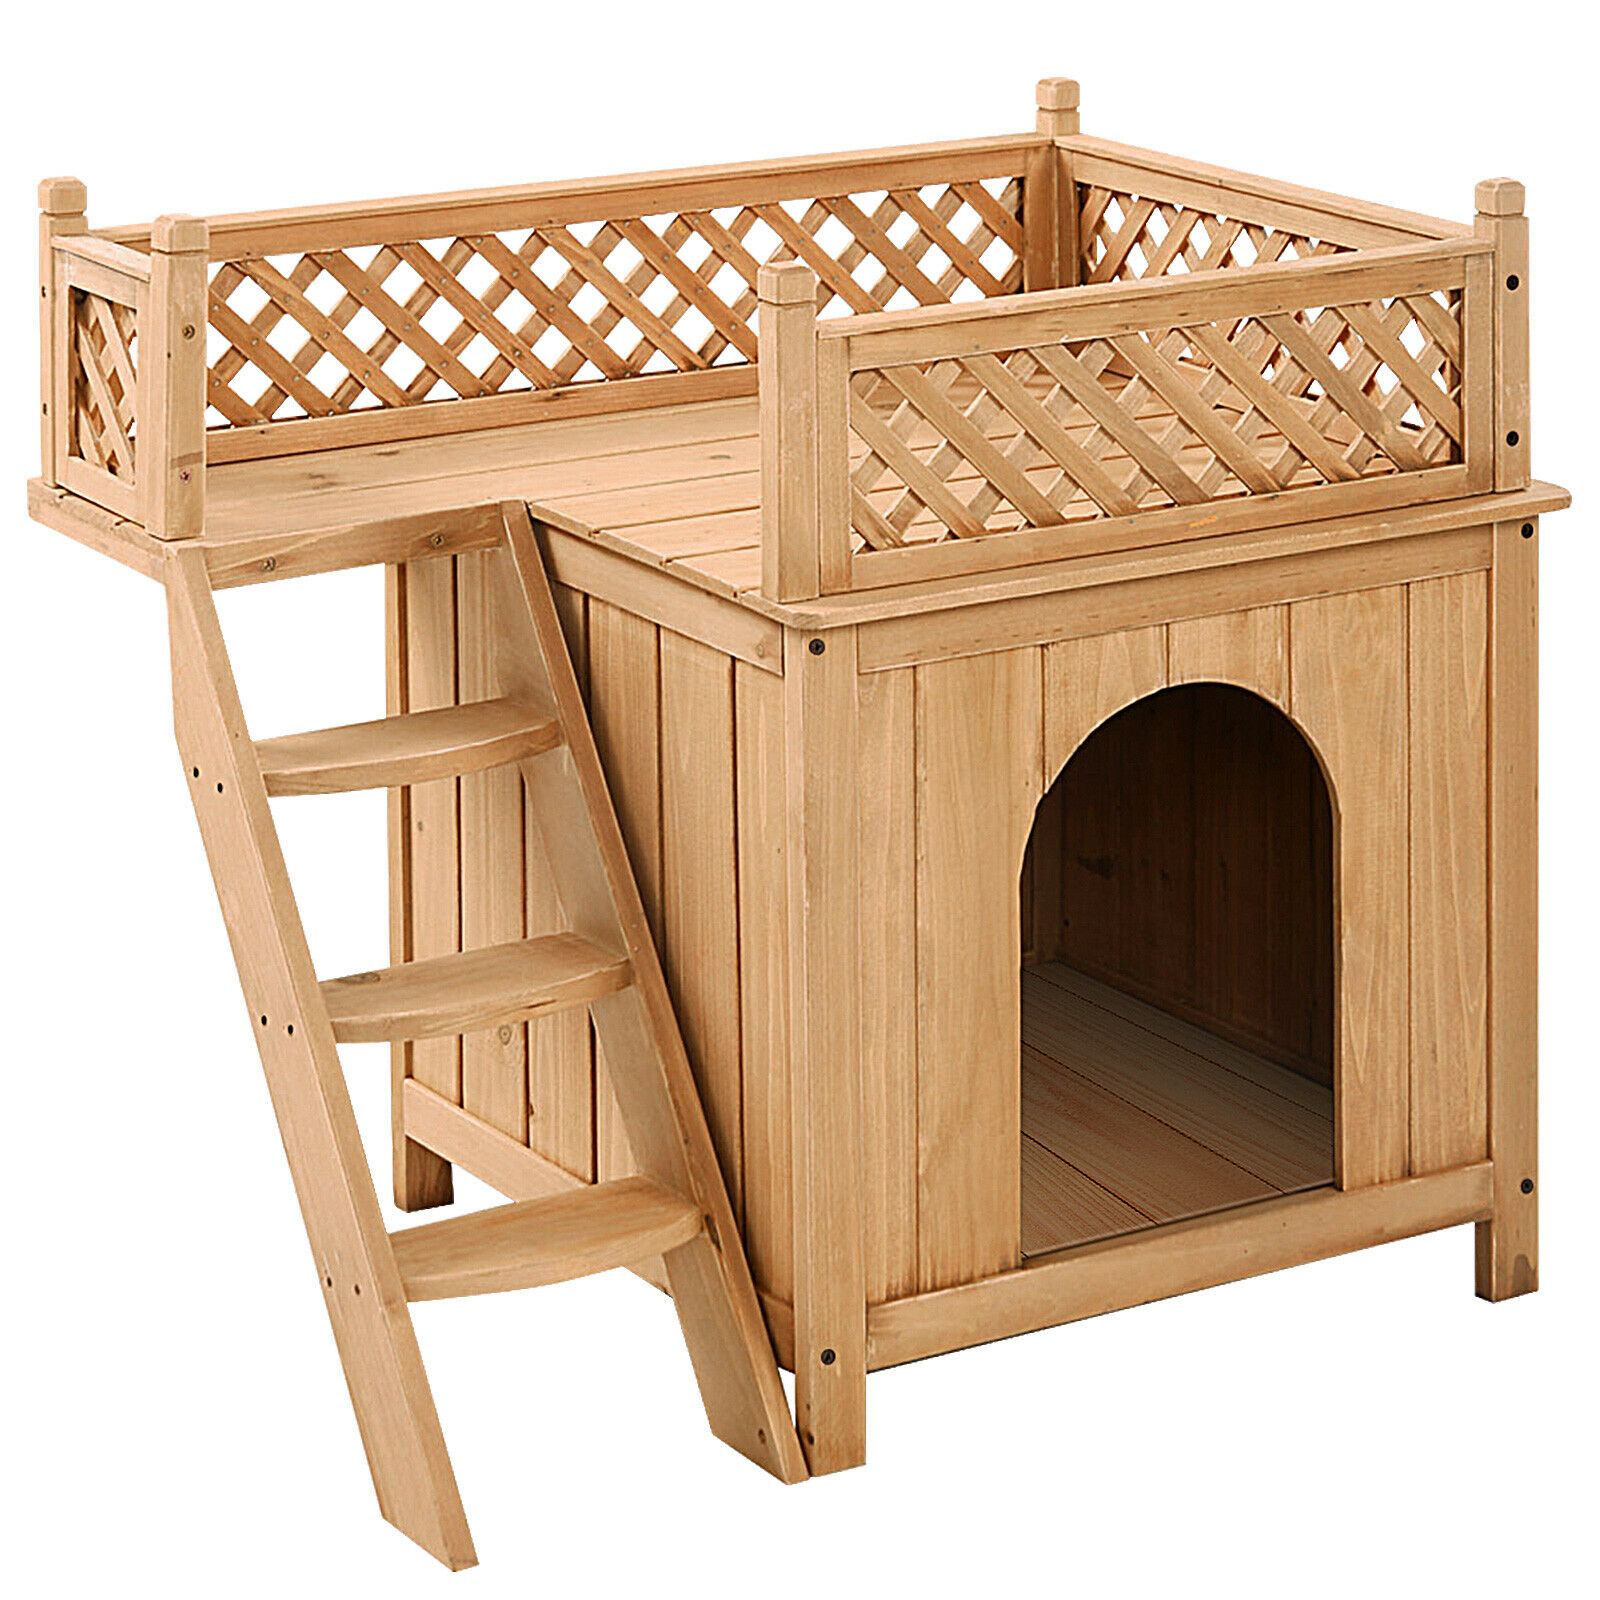 Wooden Dog / Cat House with Raised Roof Balcony & Ladder